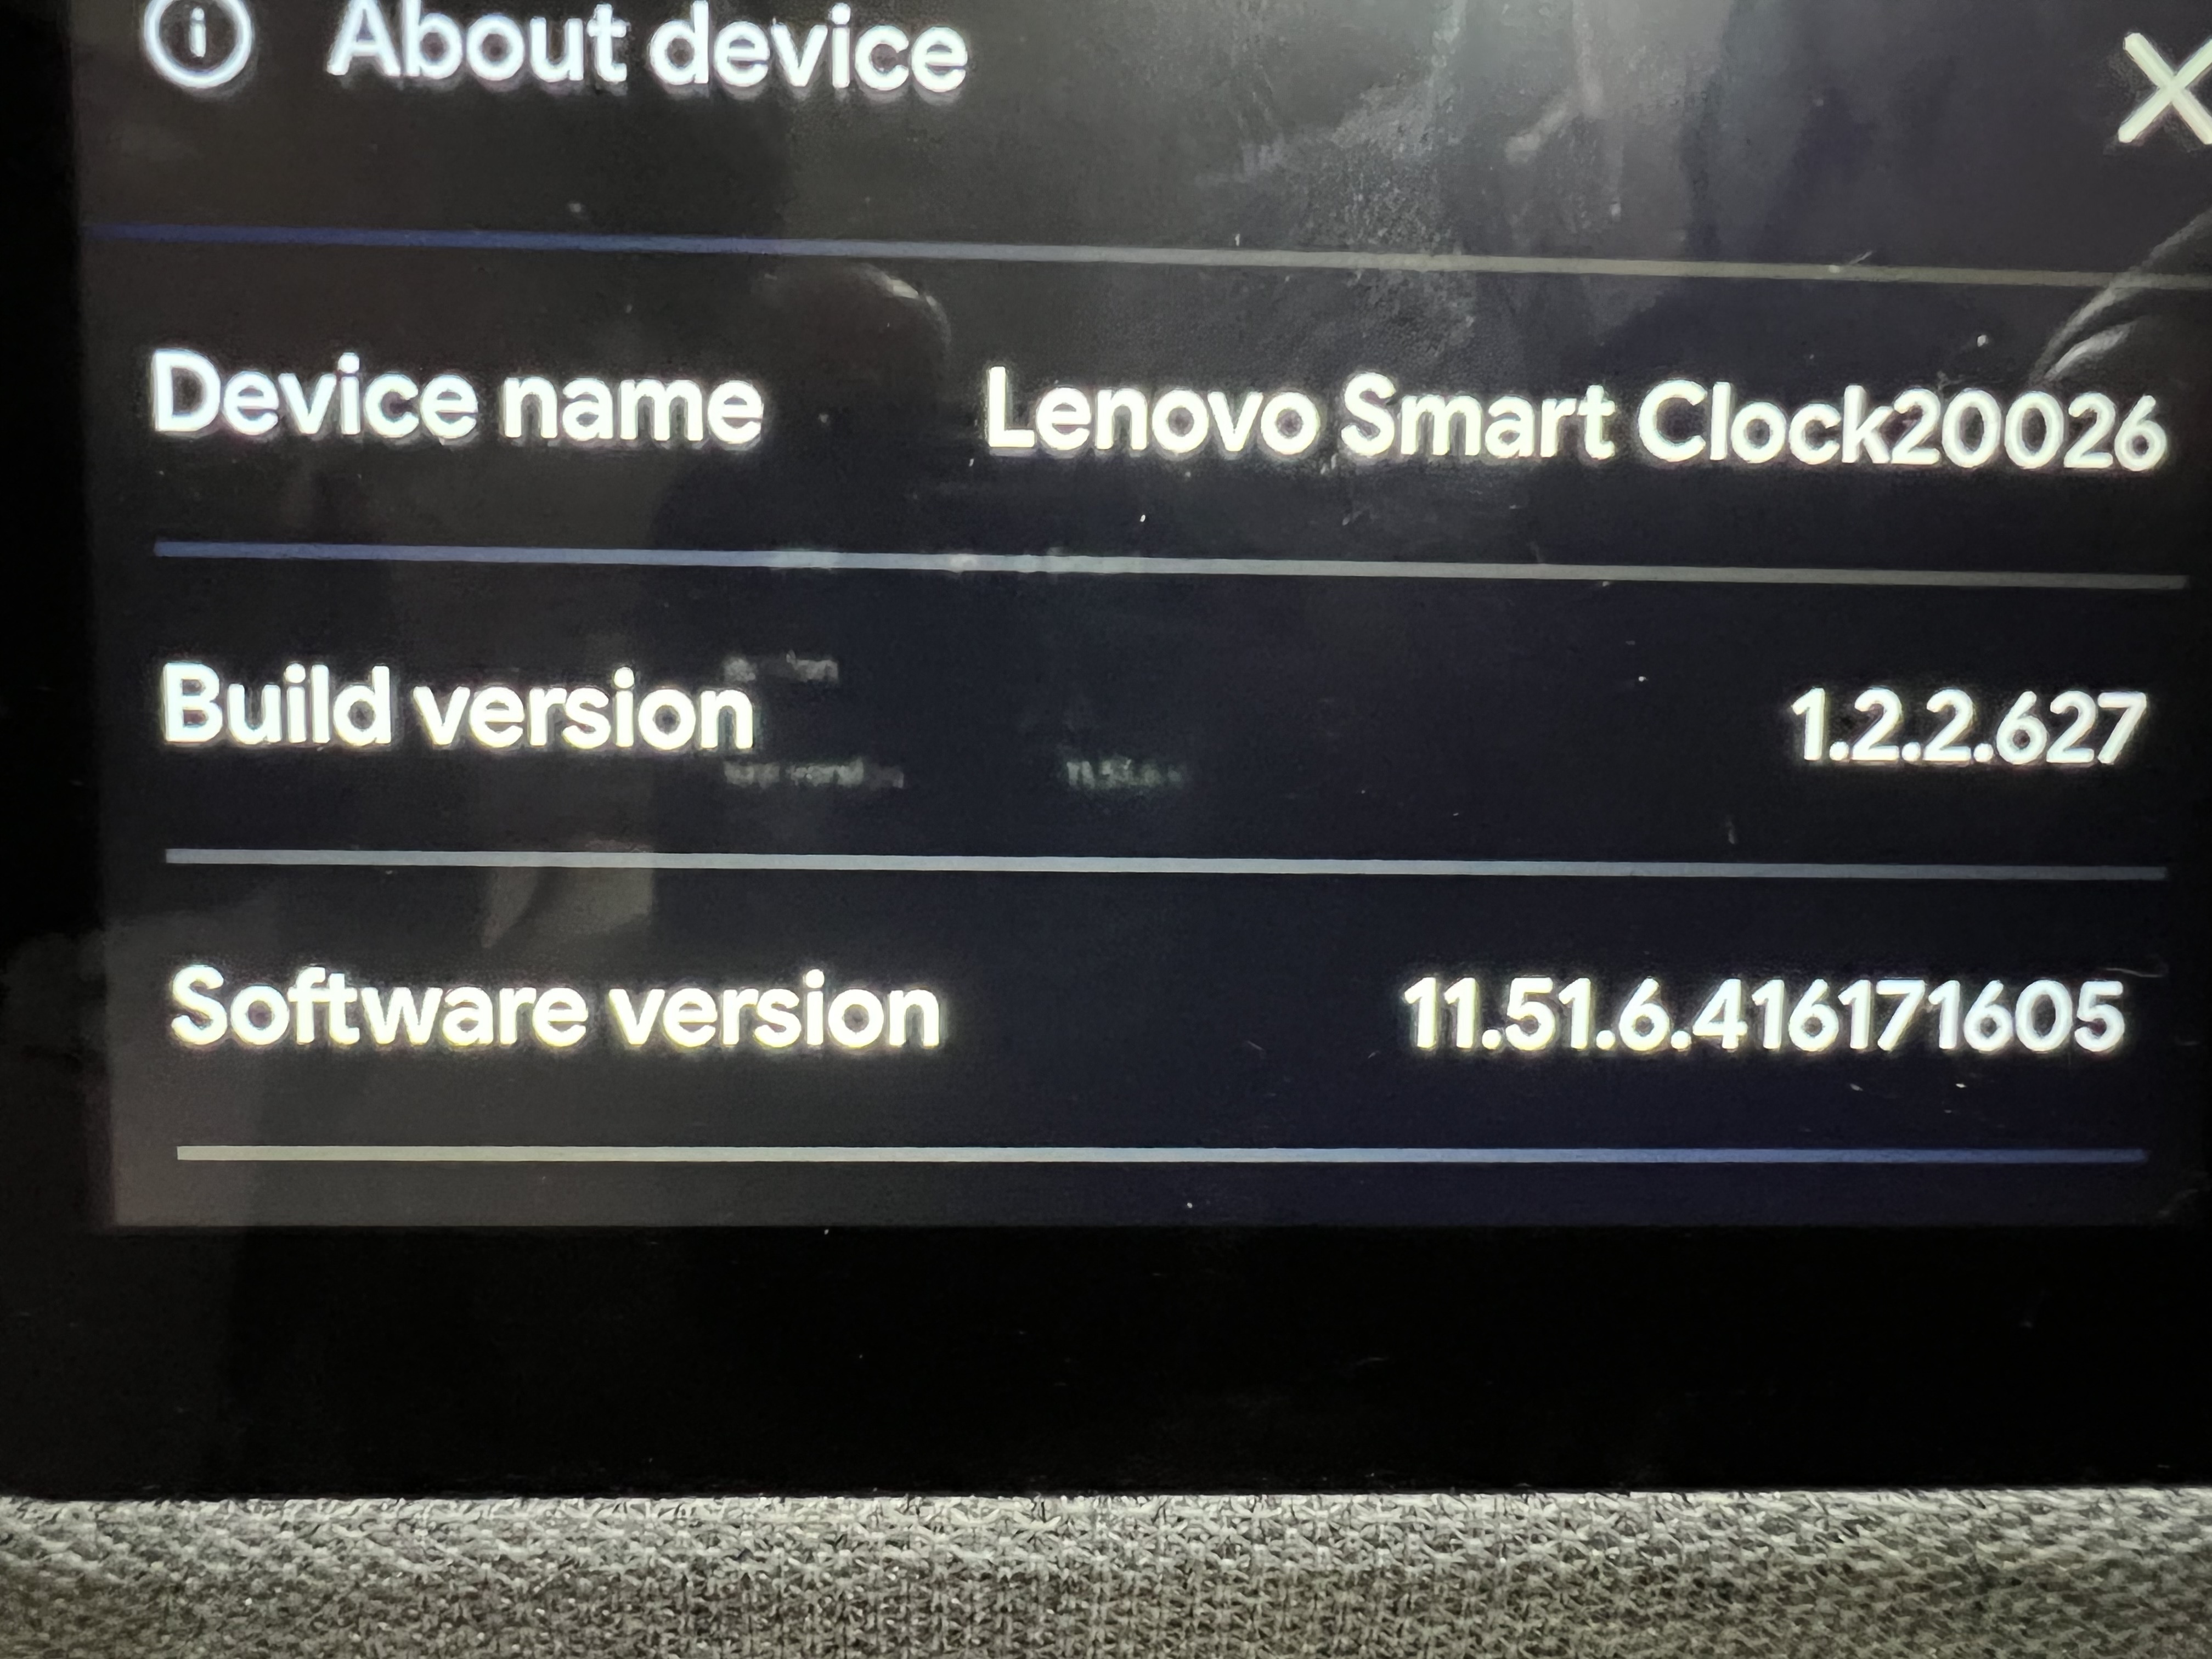 Lenovo-Smart-Clock-2-Unable-to-connect-to-the-wifi - English Community -  LENOVO COMMUNITY